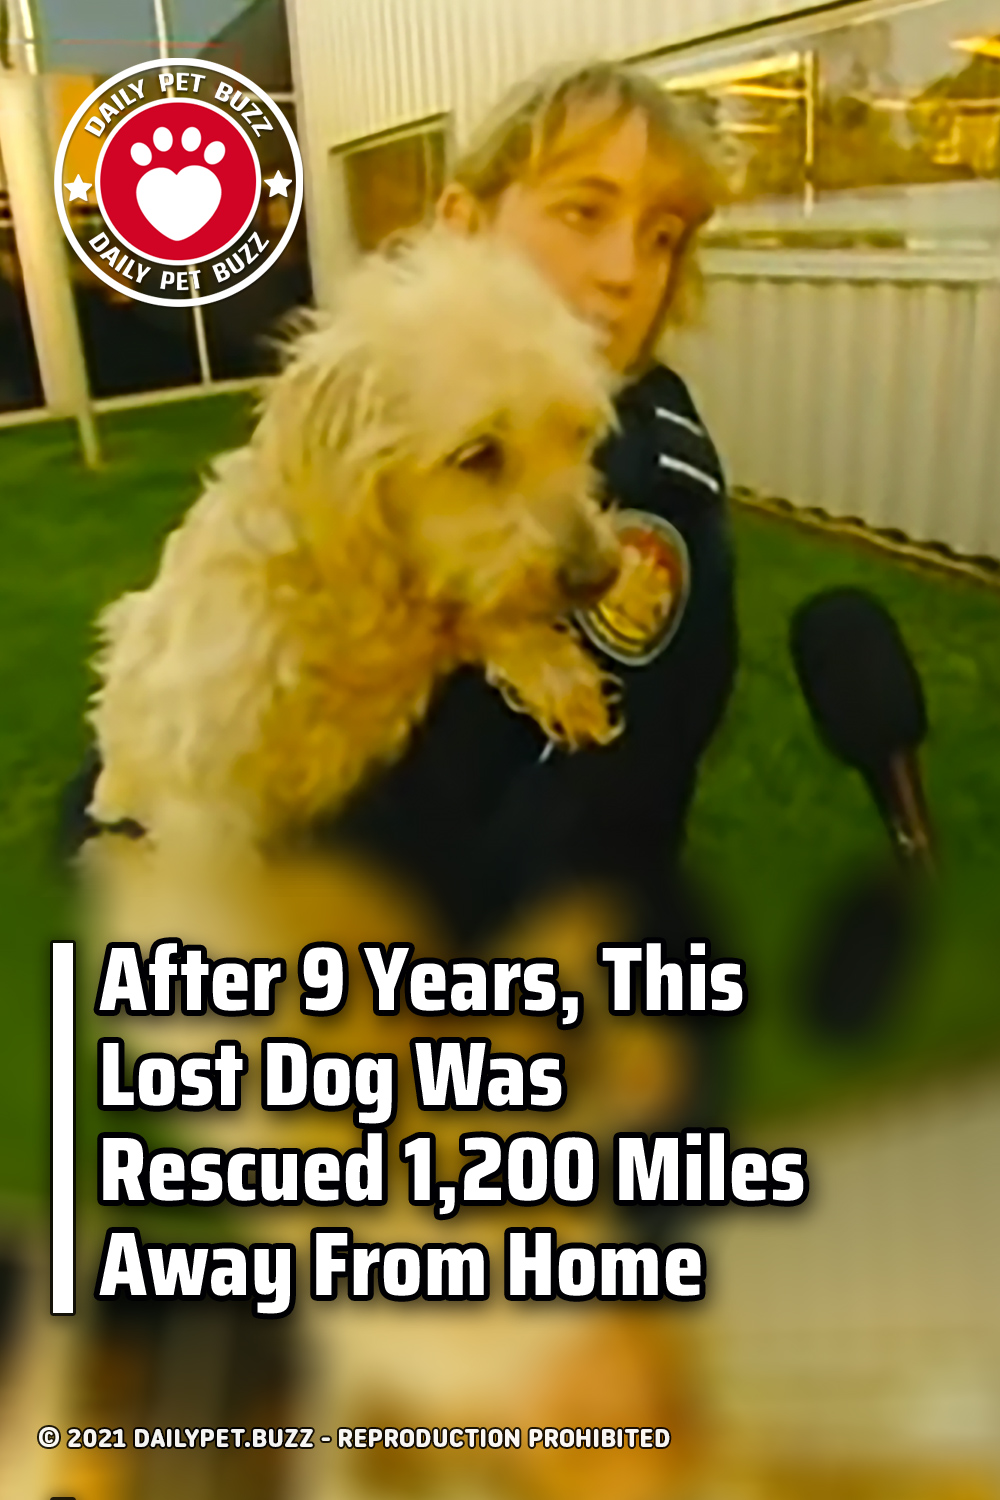 After 9 Years, This Lost Dog Was Rescued 1,200 Miles Away From Home